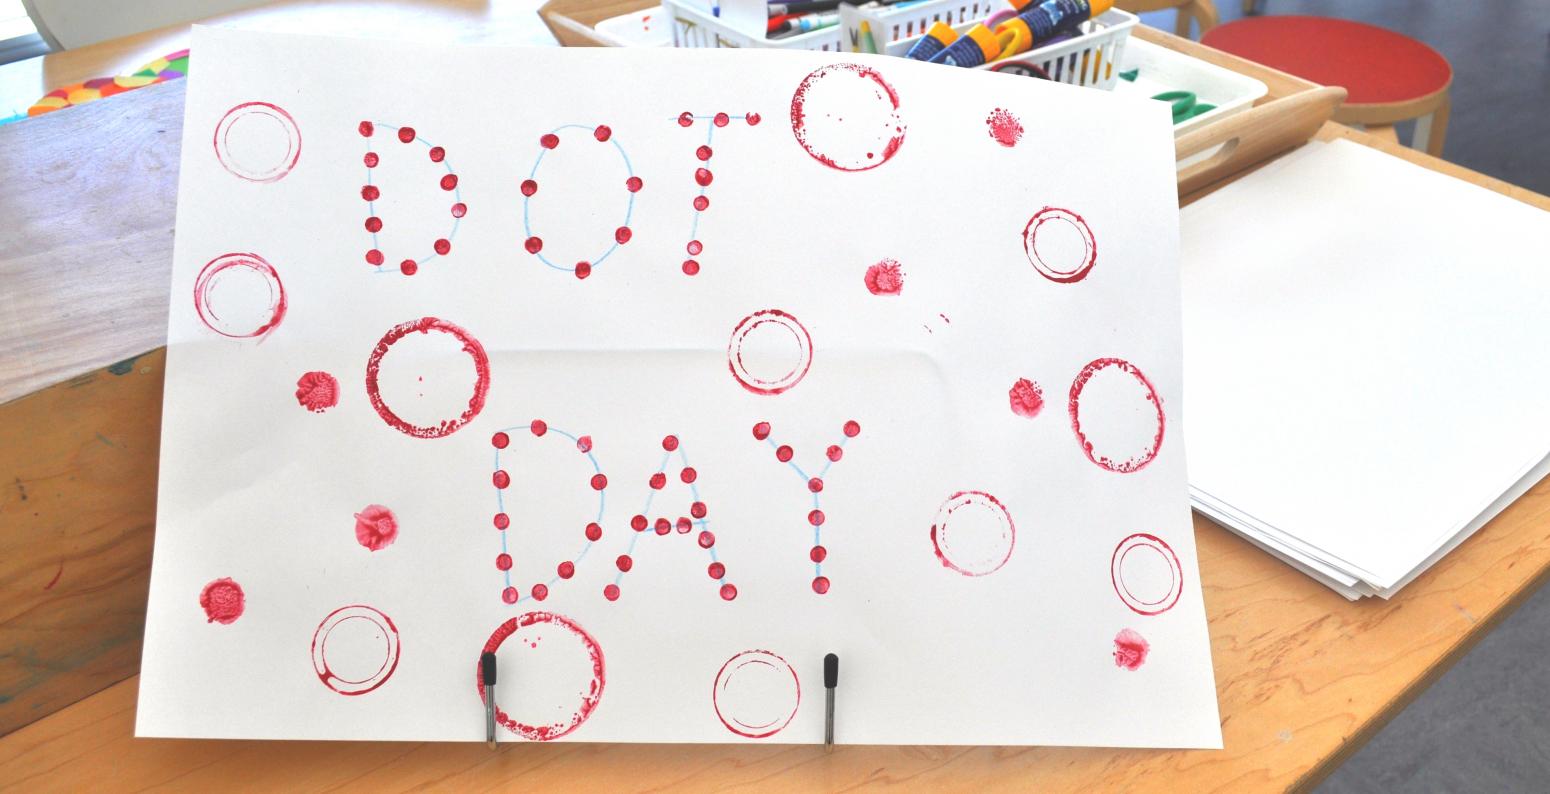 A sign made from red dots saying "Dot Day"